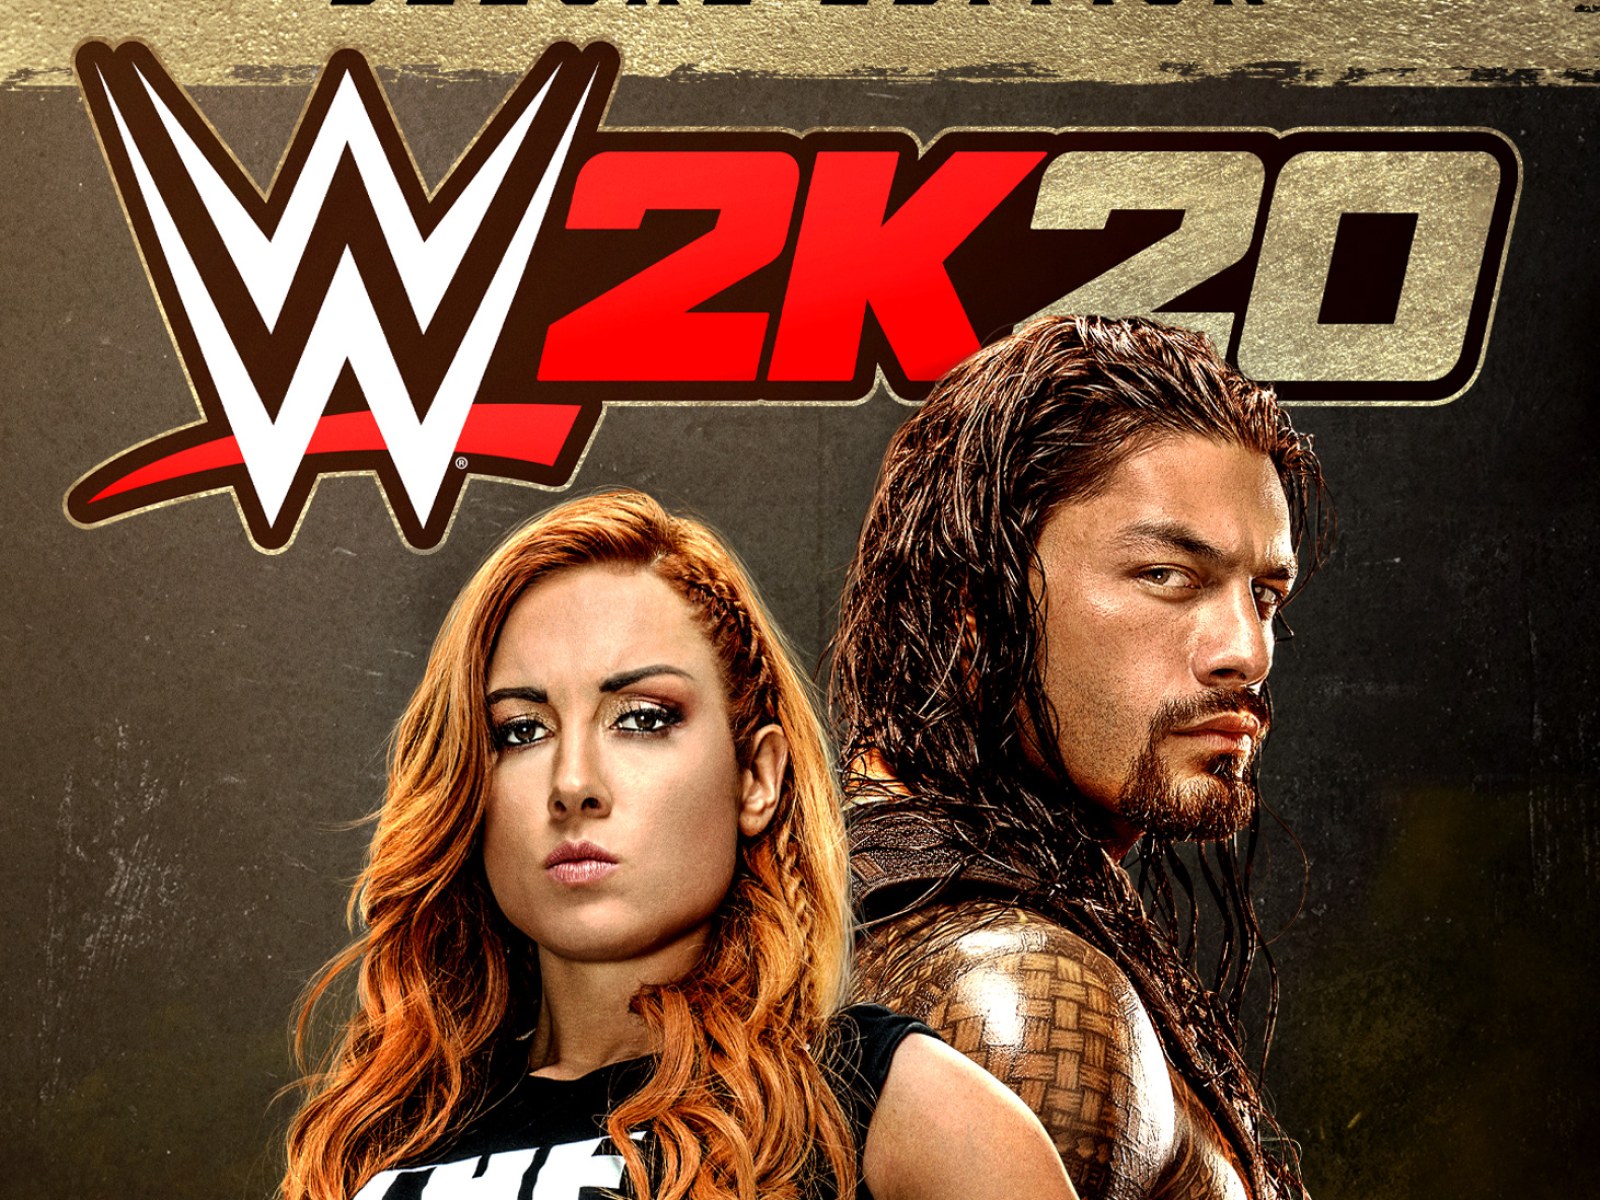 Wwe 2k20 Roster Every Wrestler And Legend Included In This Year S Game